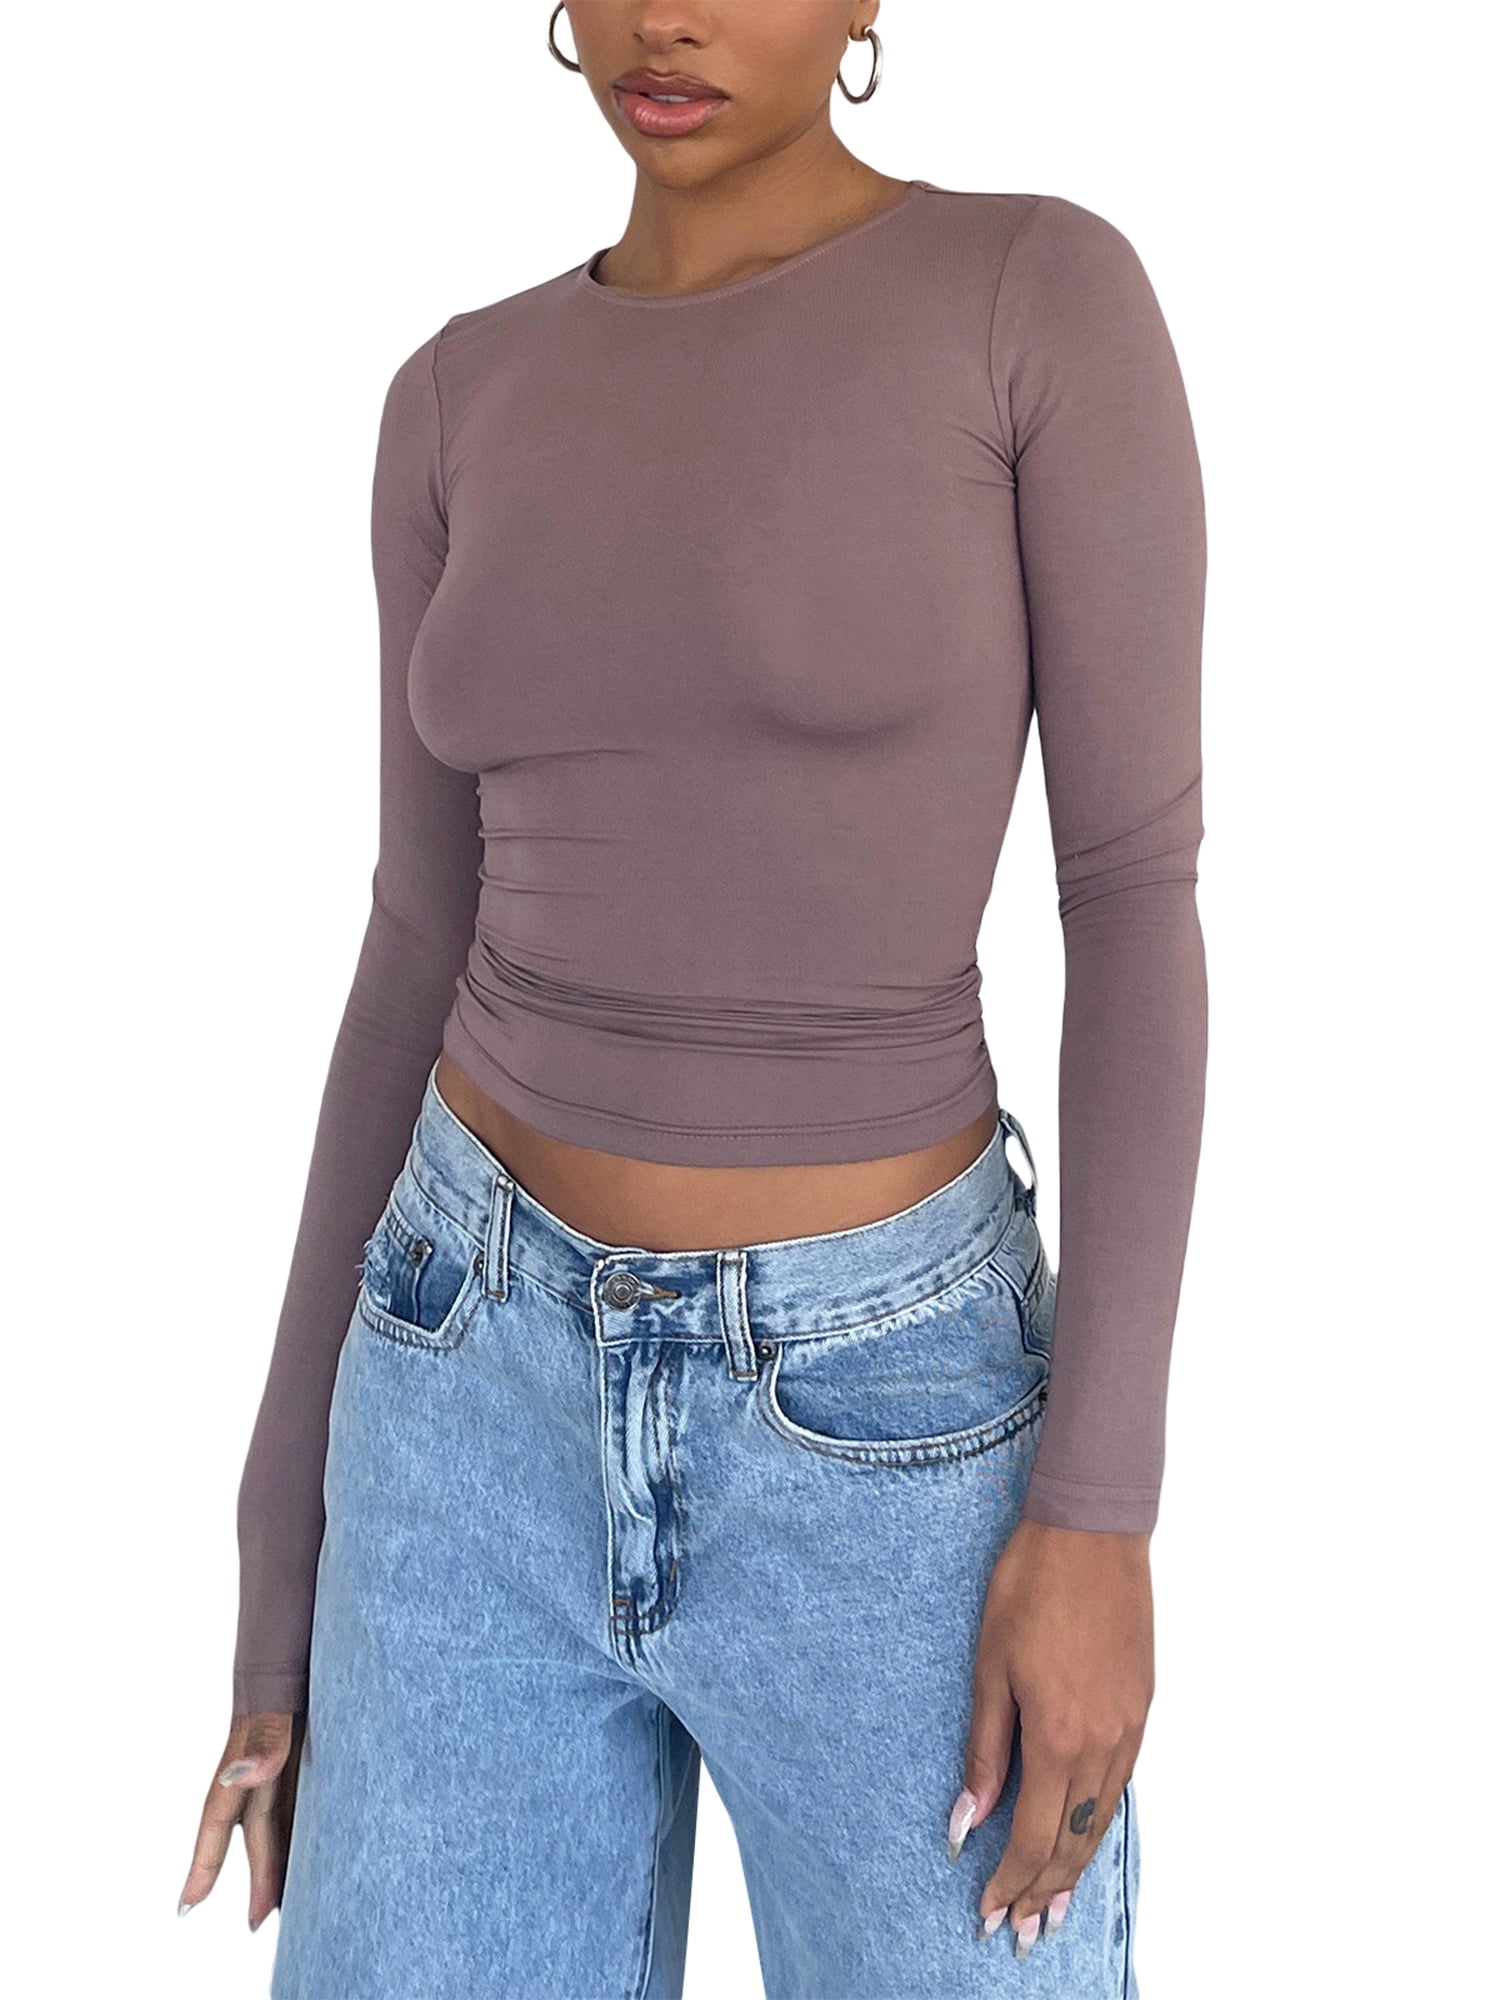 Women's Slim Fit Basic Crop Tops Solid Color Long Sleeve Round